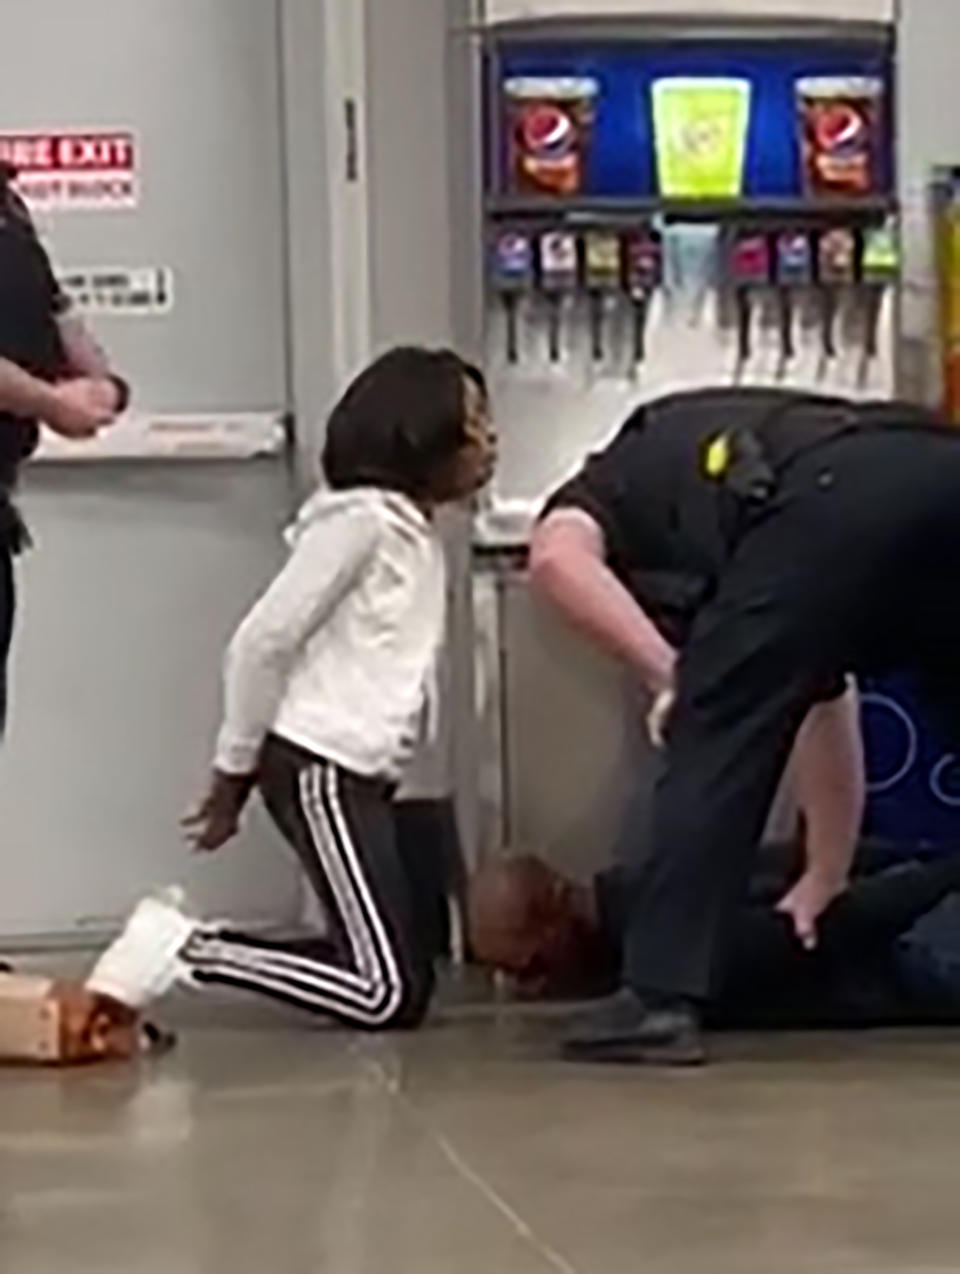 FILE - In this March 23, 2020, file frame grab taken from video, Marvia Gray, left and her son Derek Gray are arrested by white police officers at a Sam's Club store in Des Peres, Missouri. St. Louis County’s prosecutor launched of an investigation Wednesday, May 20, 2020, after video showed white police officers forcefully arresting Gray and her son Derek. (Photo courtesy Action Injury Law Group via AP, File)